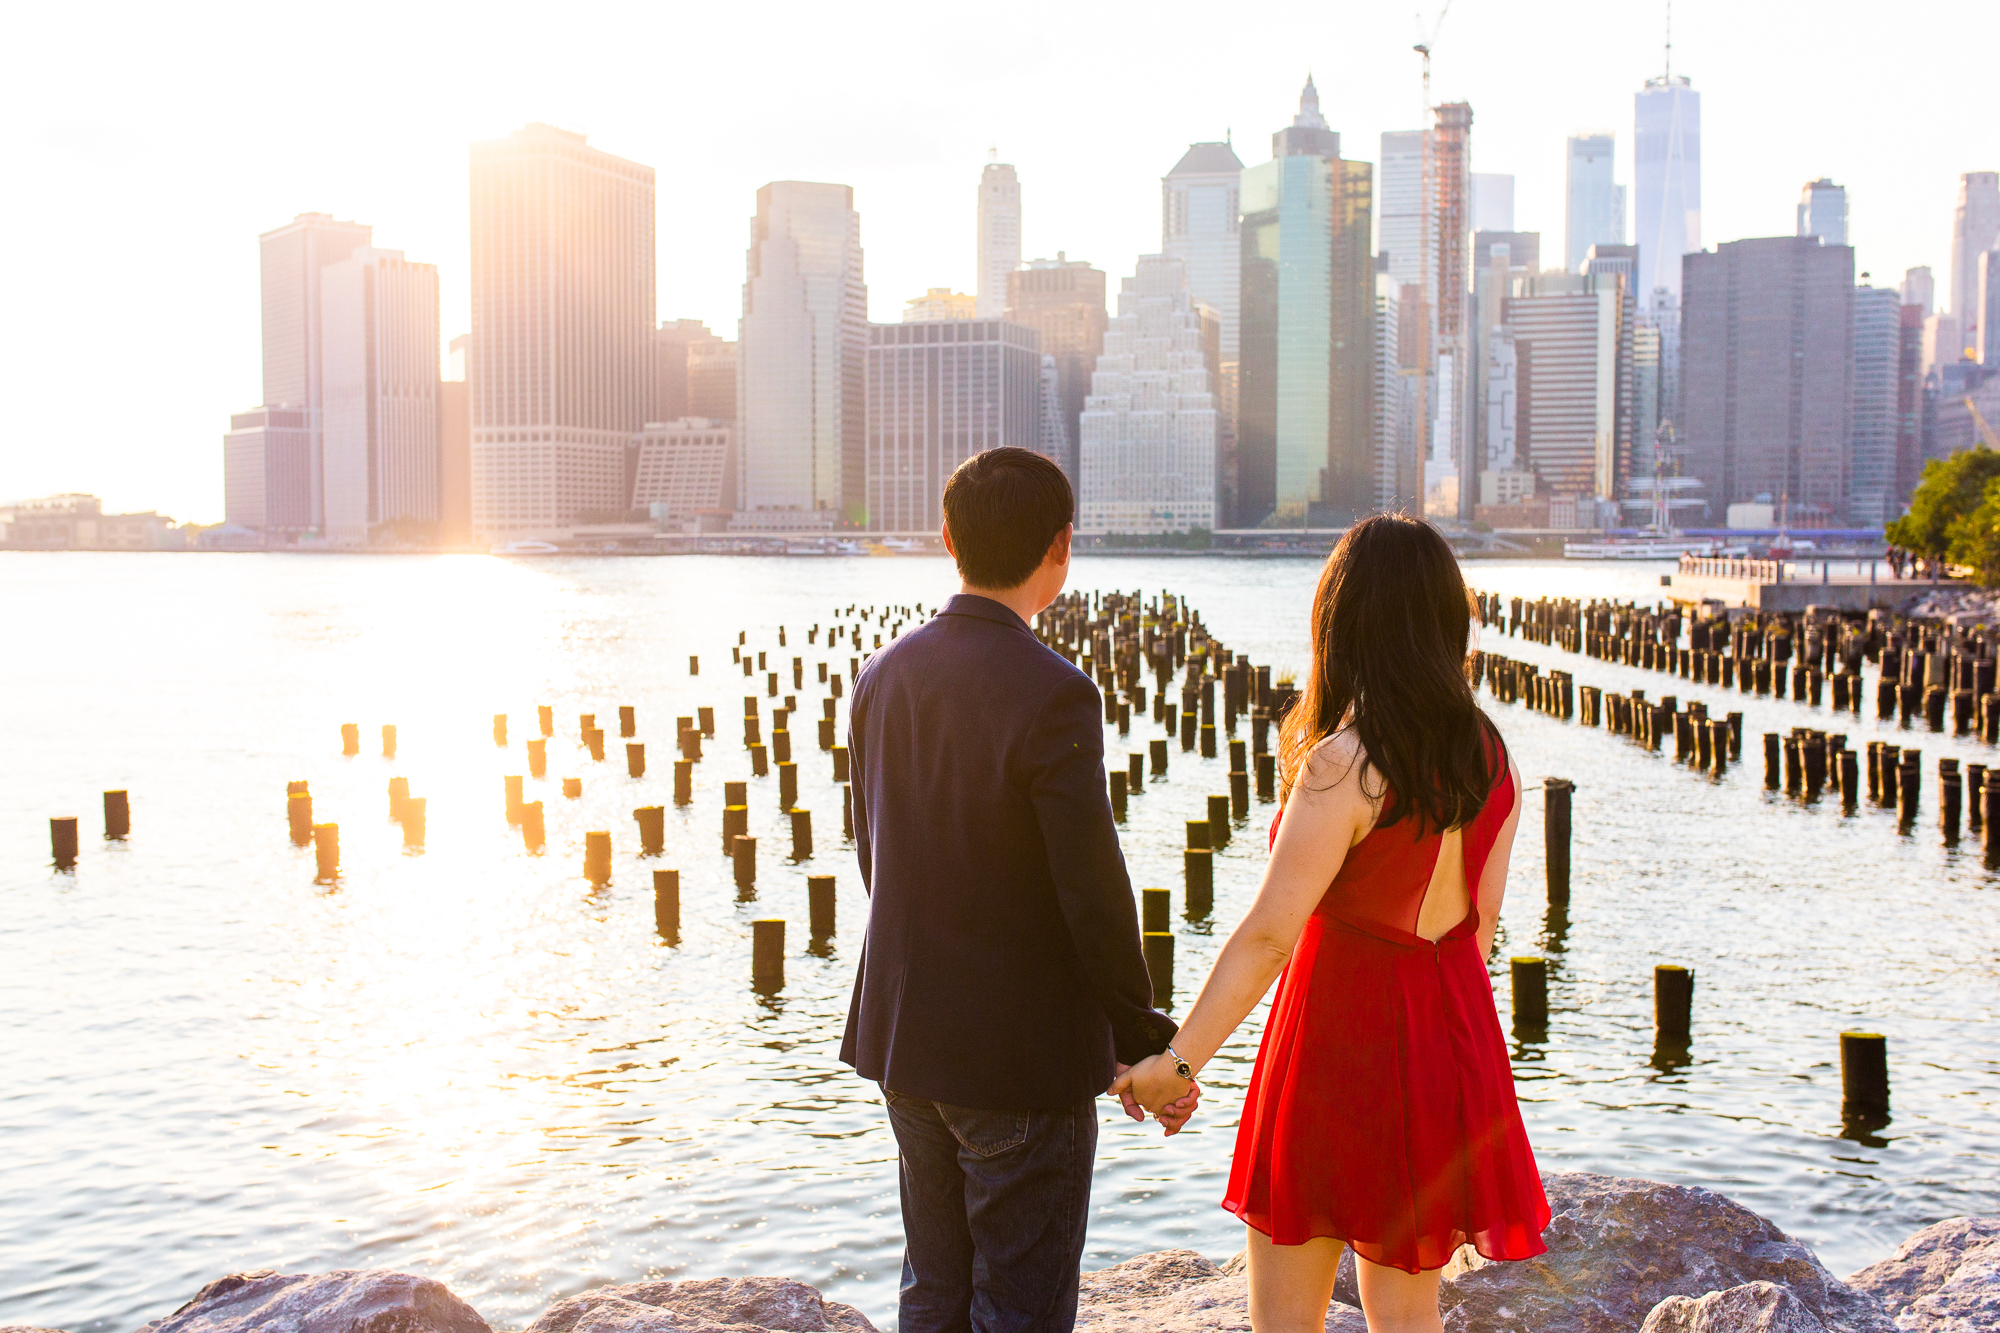 A couple hold hands and look at the city skyline.